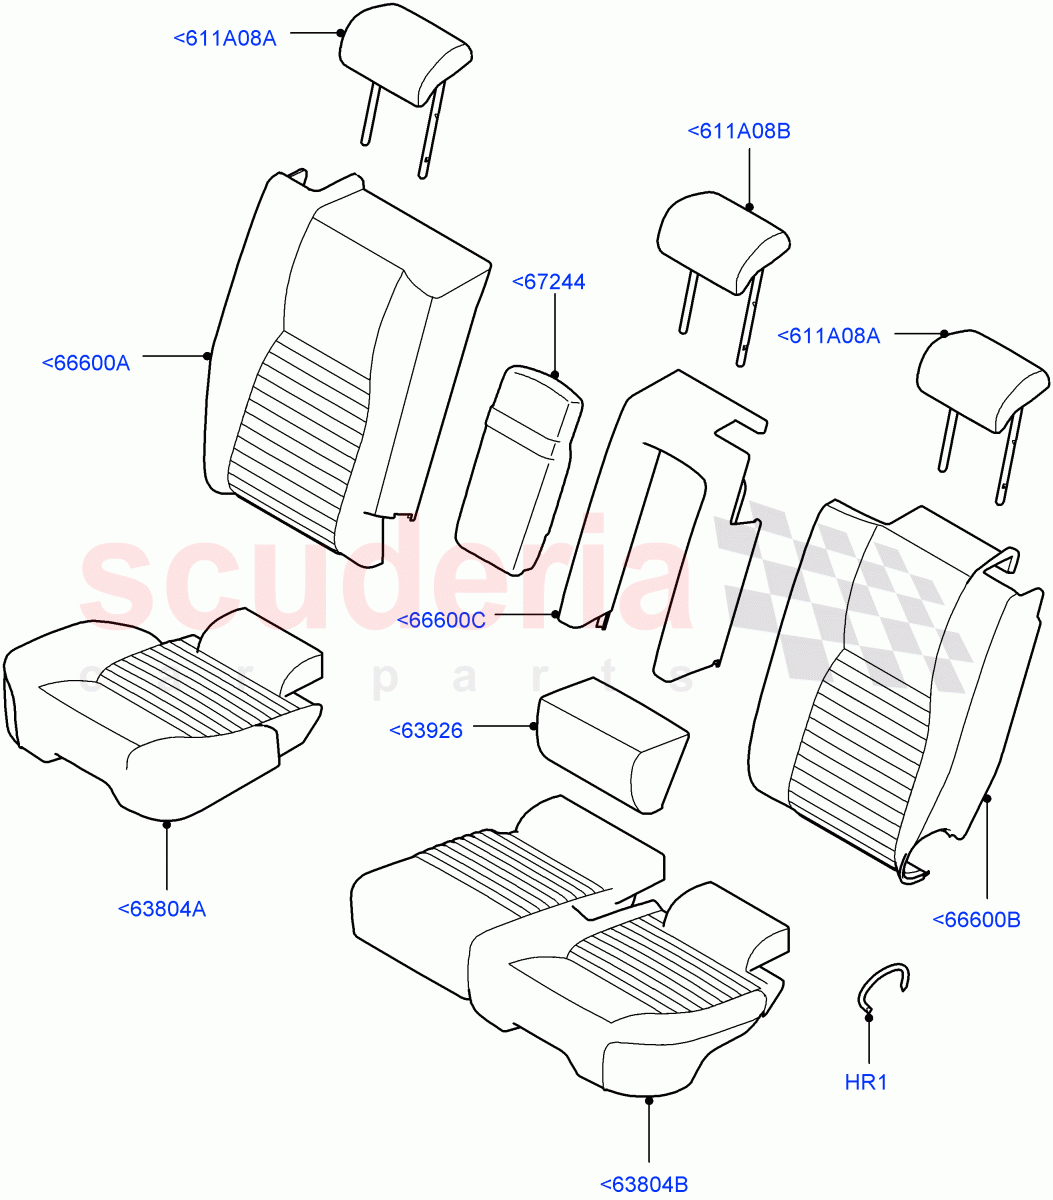 Rear Seat Covers(Taurus Leather Perforated,Changsu (China),60/40 Load Through With Slide,With 60/40 Manual Fold Thru Rr Seat)((V)FROMFG000001) of Land Rover Land Rover Discovery Sport (2015+) [2.0 Turbo Petrol AJ200P]